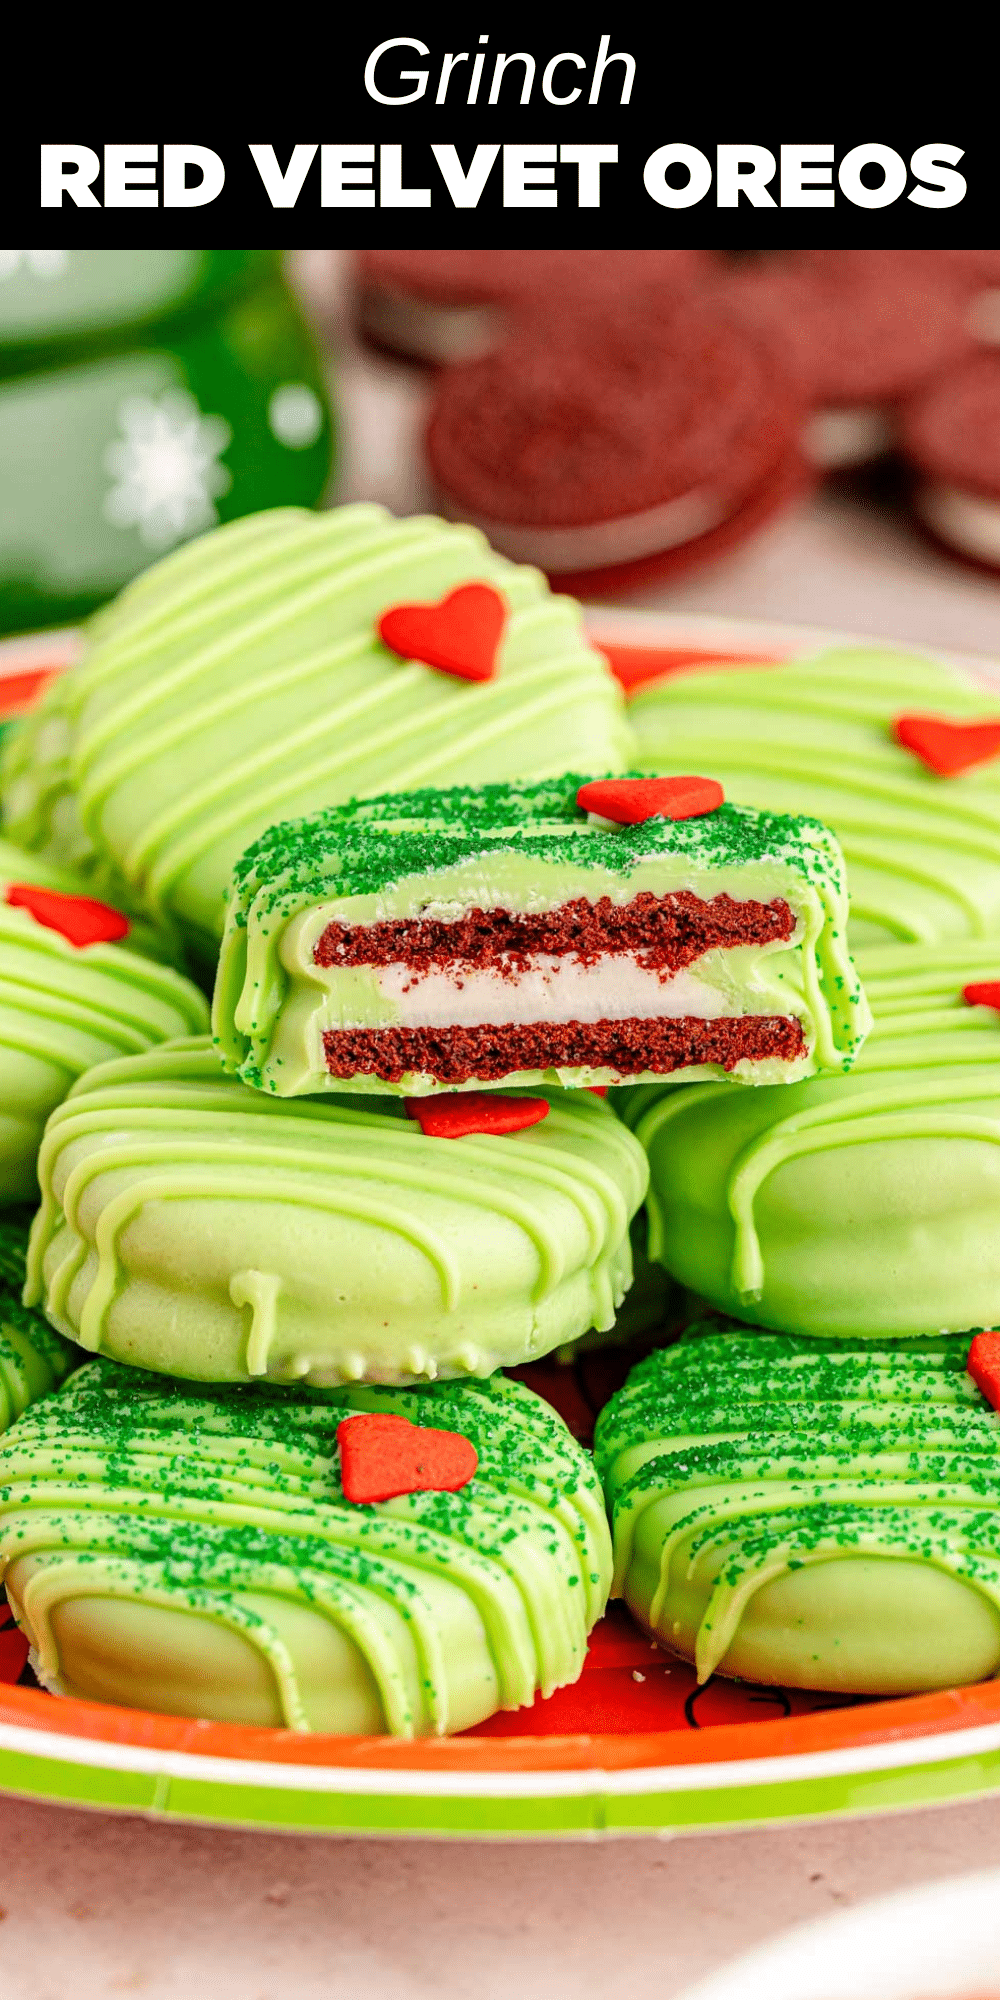 These whimsical Grinch Red Velvet Oreos are a fun holiday treat that combines the rich flavors of red velvet cake with the sweetness of a creamy chocolate coating. The vibrant green color and little Grinch heart make them perfect for spreading a little holiday cheer.